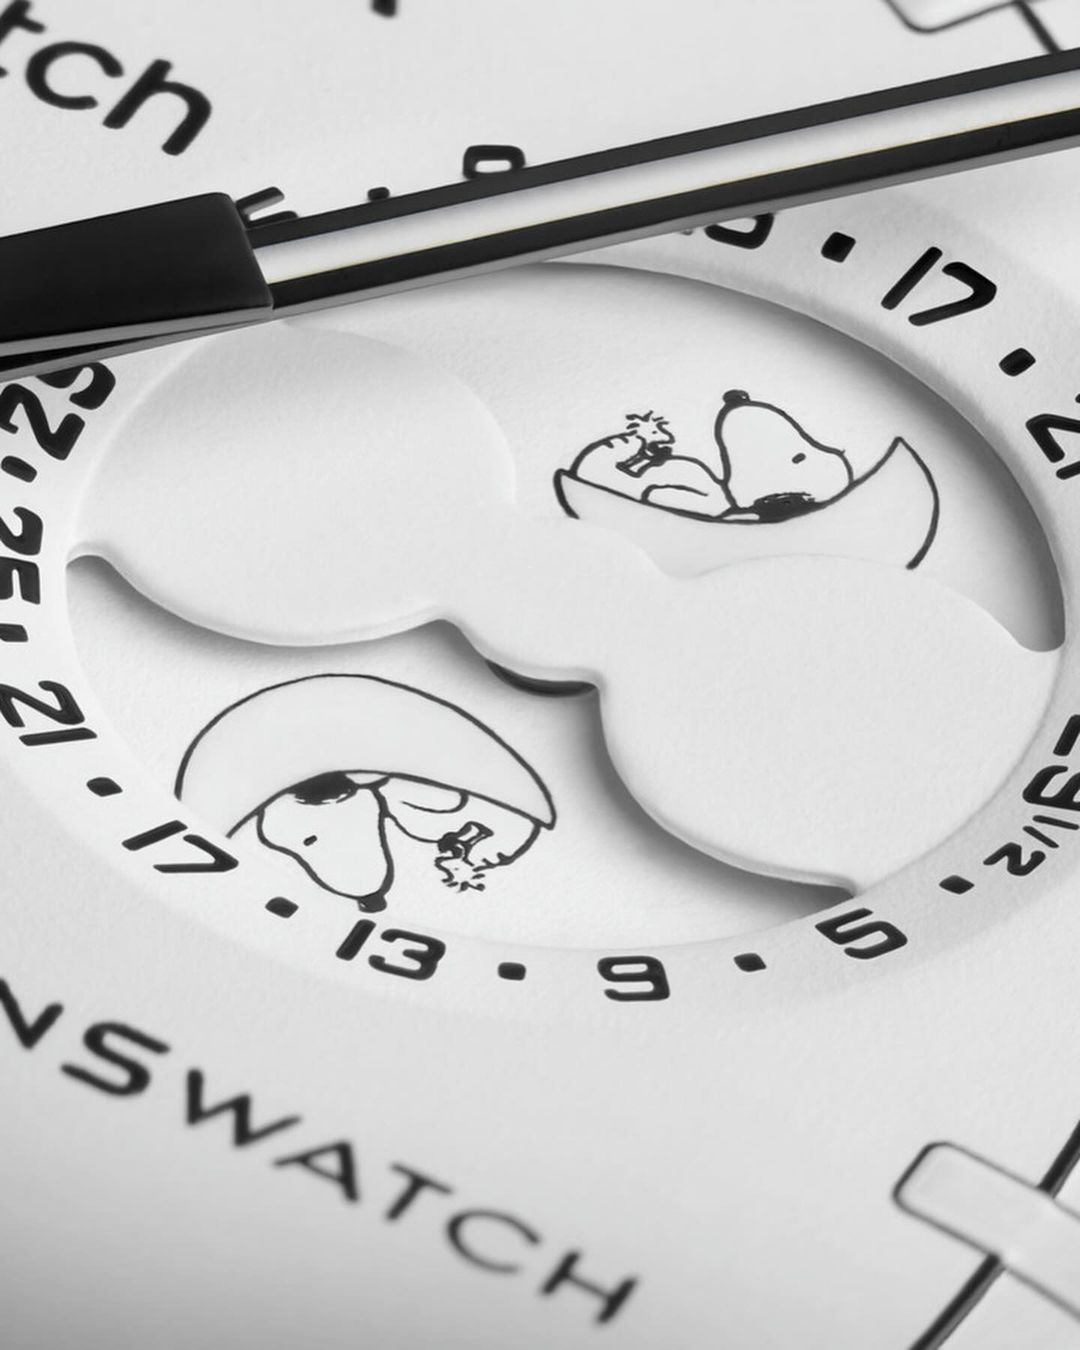 OMEGA Swatch Snoopy Mission To The Moonphase MoonSwatch